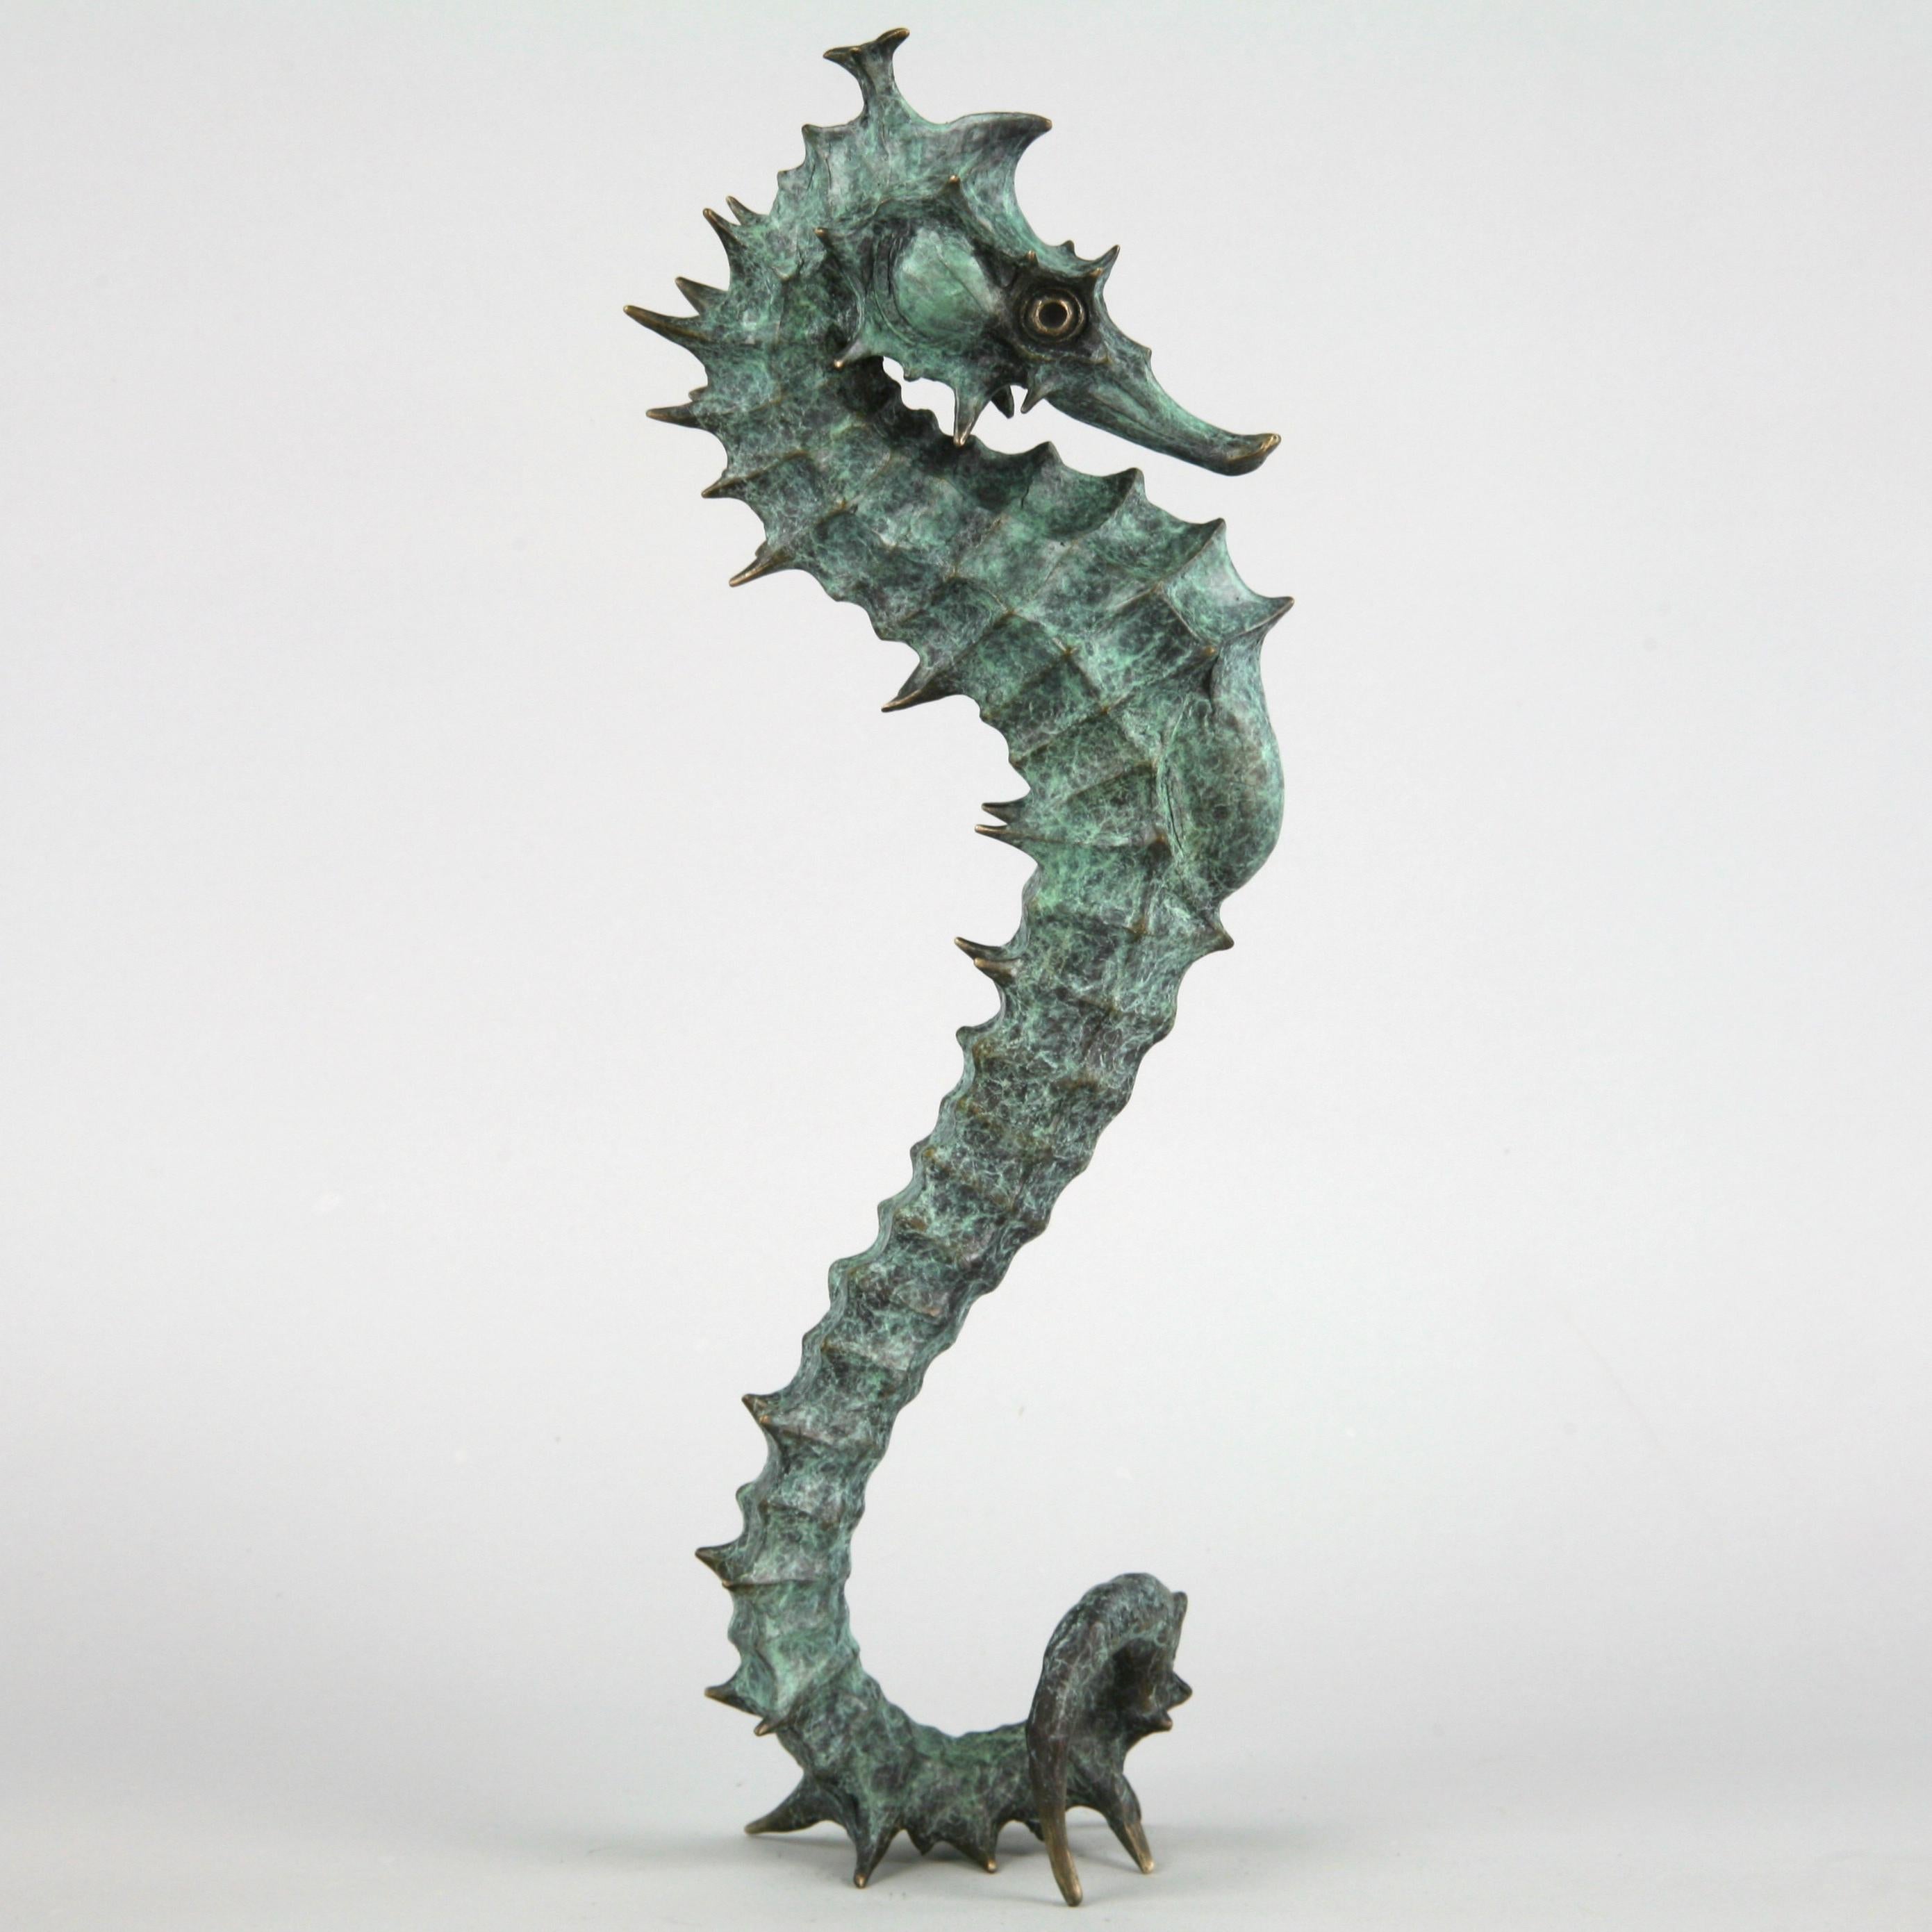 Seahorse II - bronze sea life sculpture limited edition cast art modern marine - Abstract Impressionist Sculpture by Andrzej Szymczyk